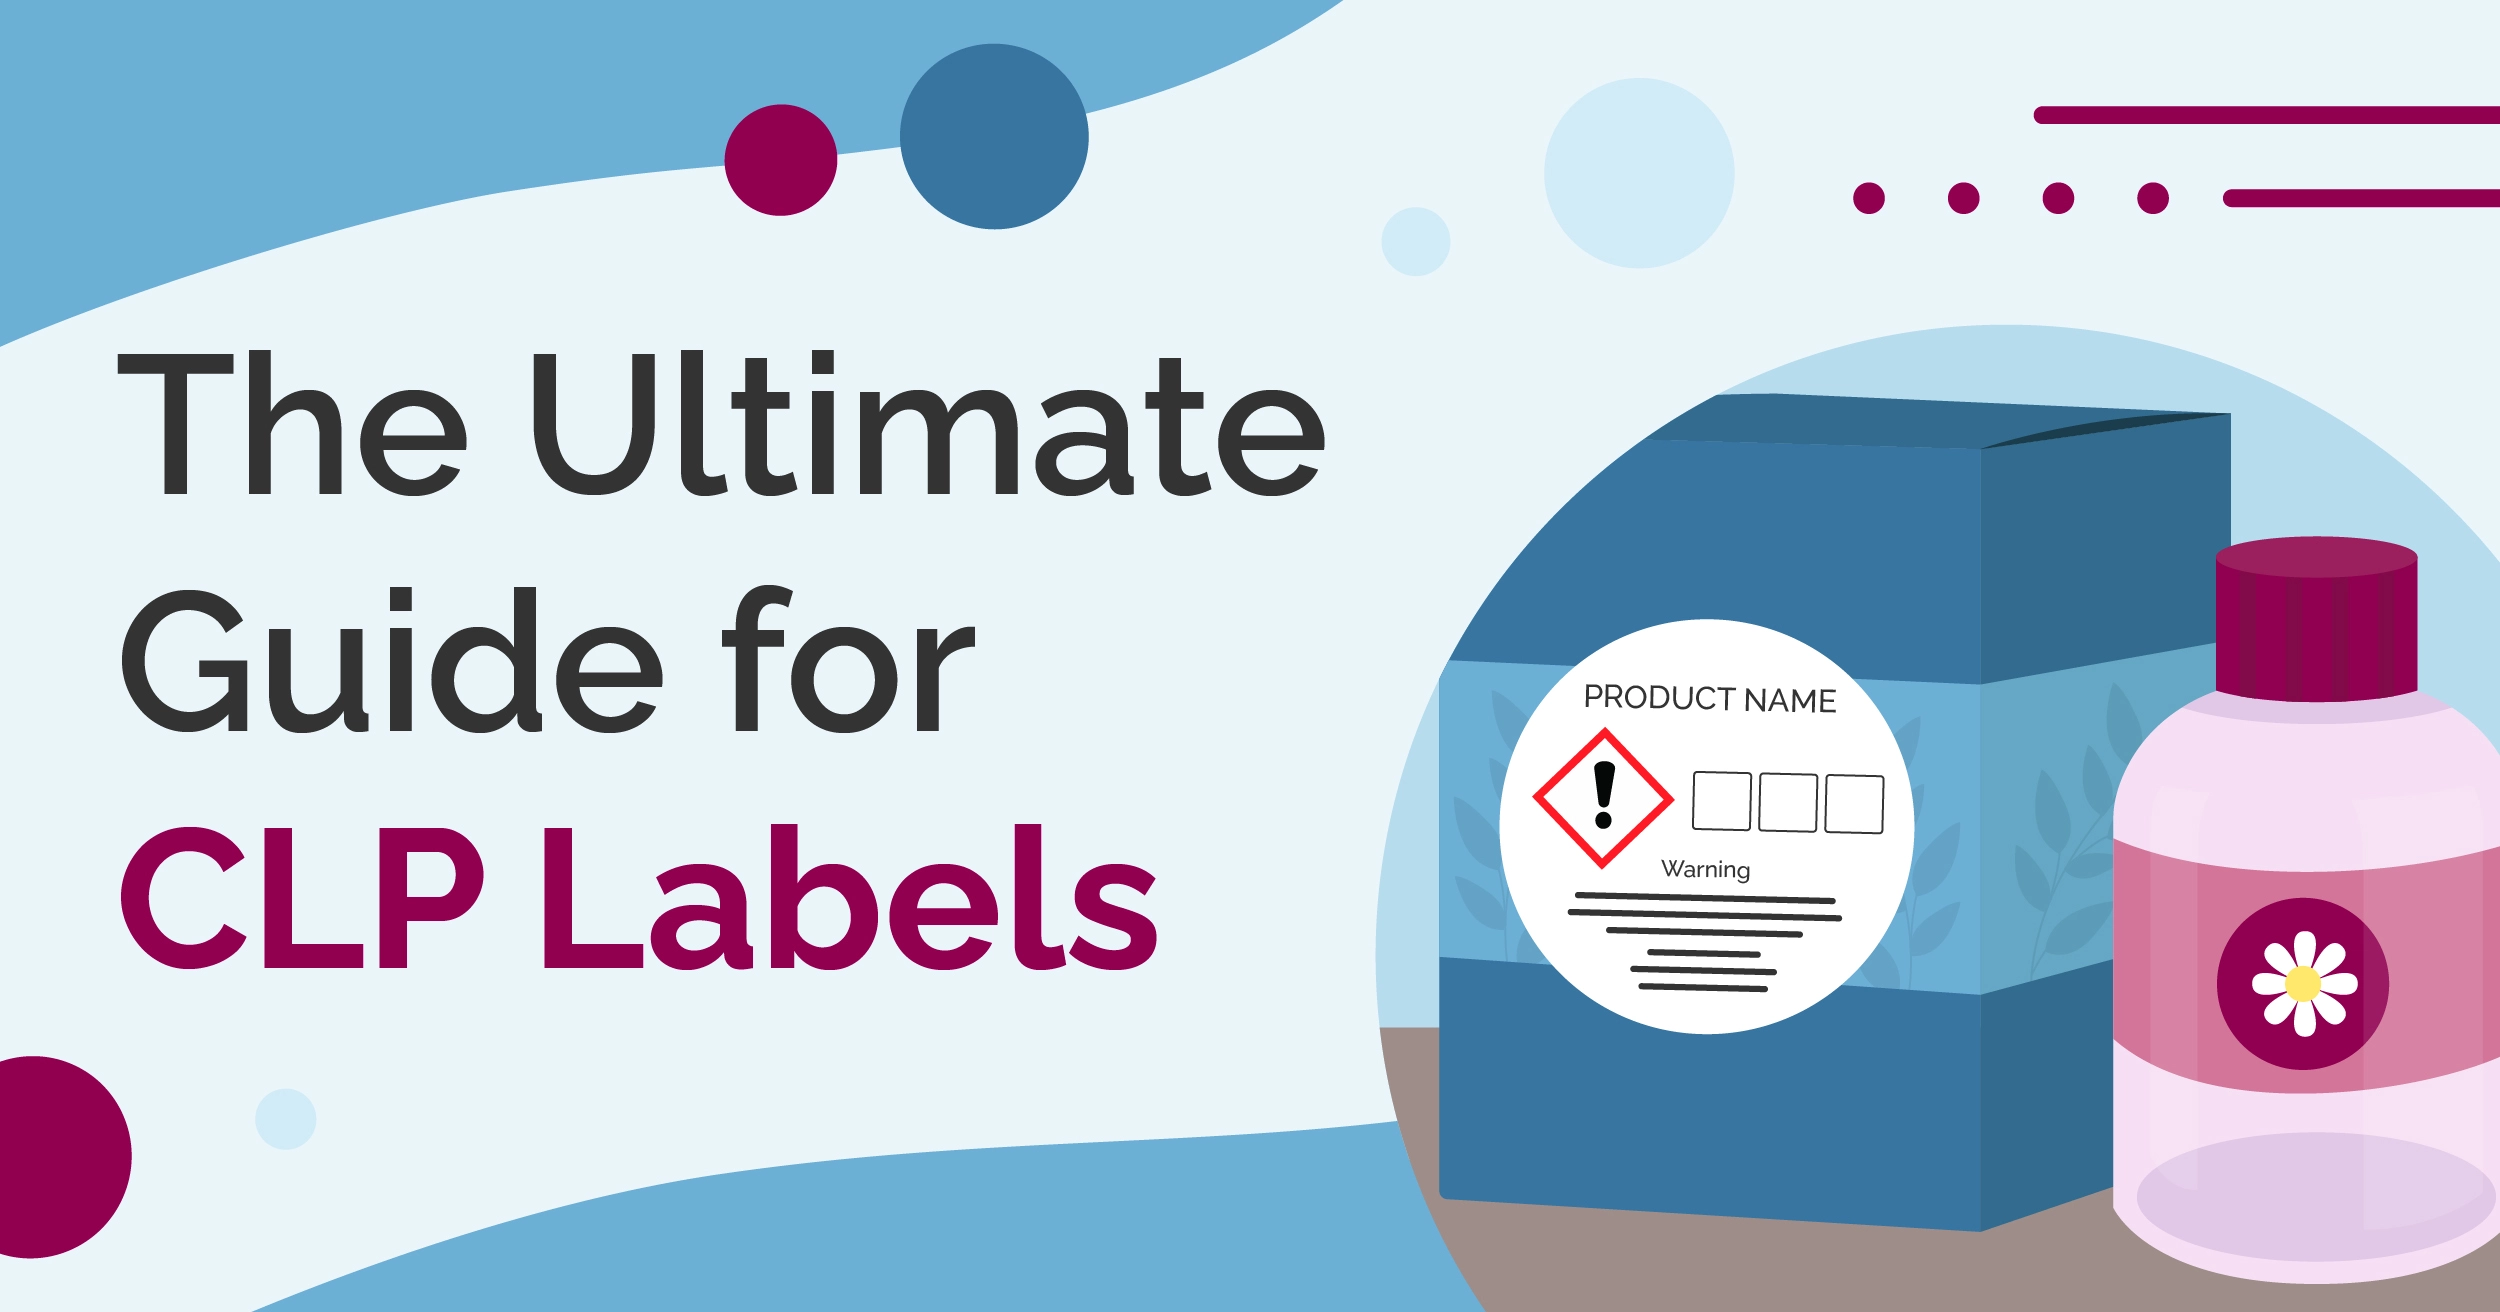 The Ultimate Guide for CLP Labels